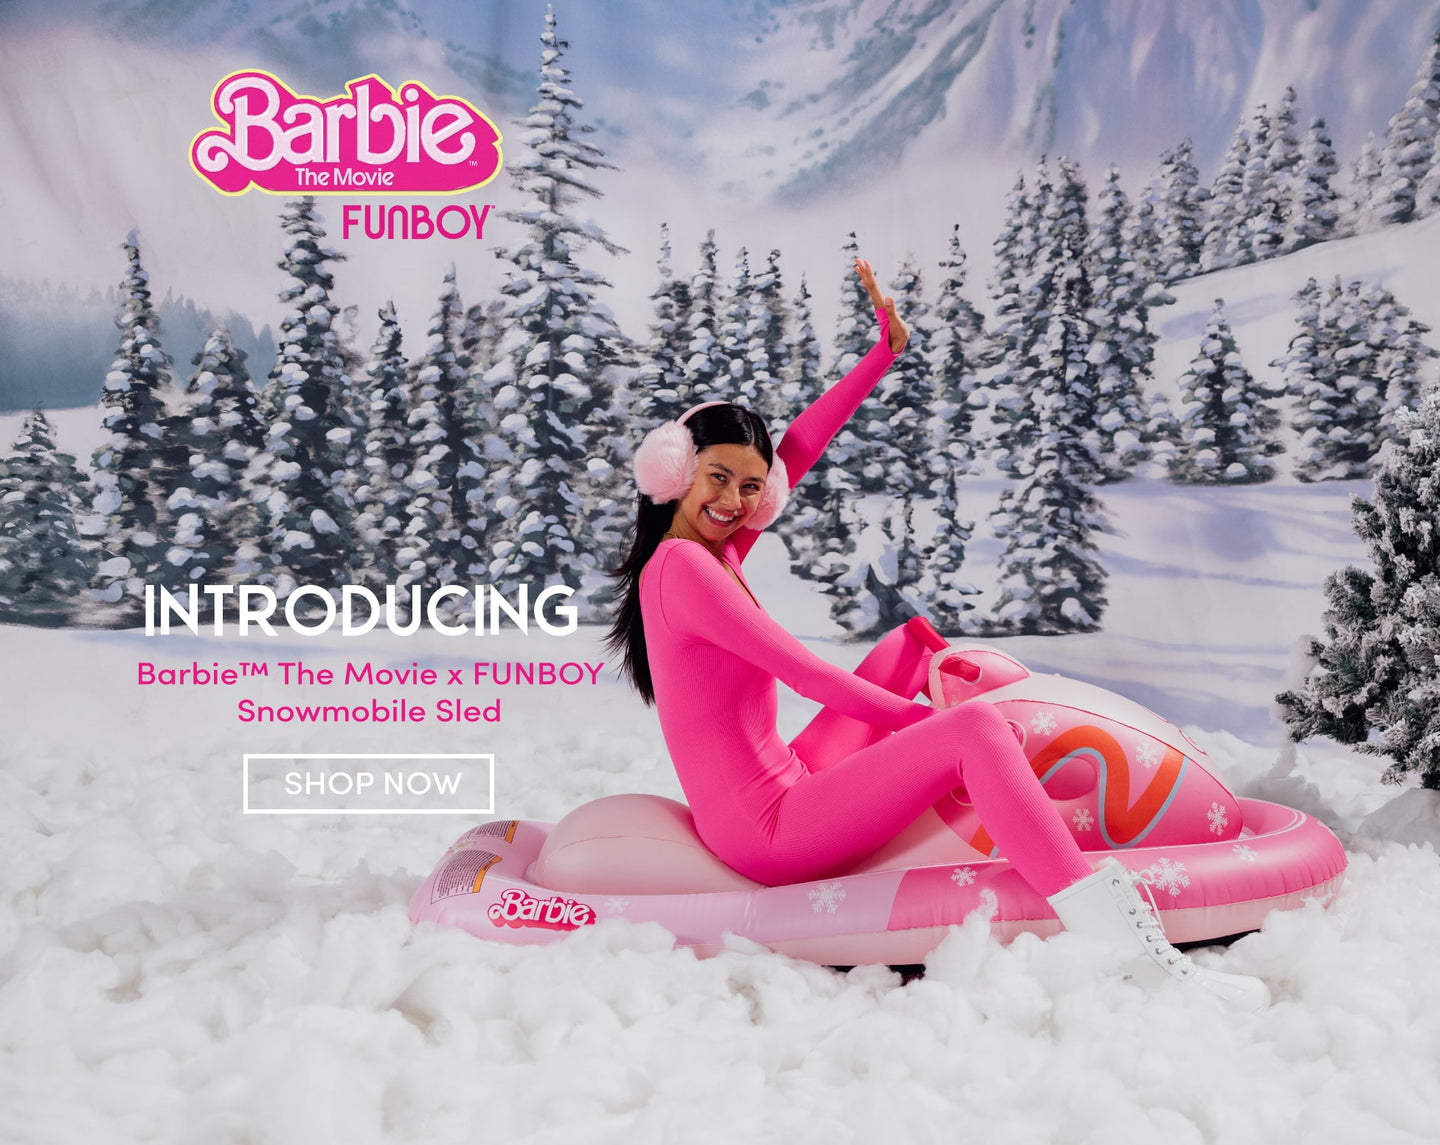 Introducing the Barbie The Movie x FUNBOY Snowmobile Sled